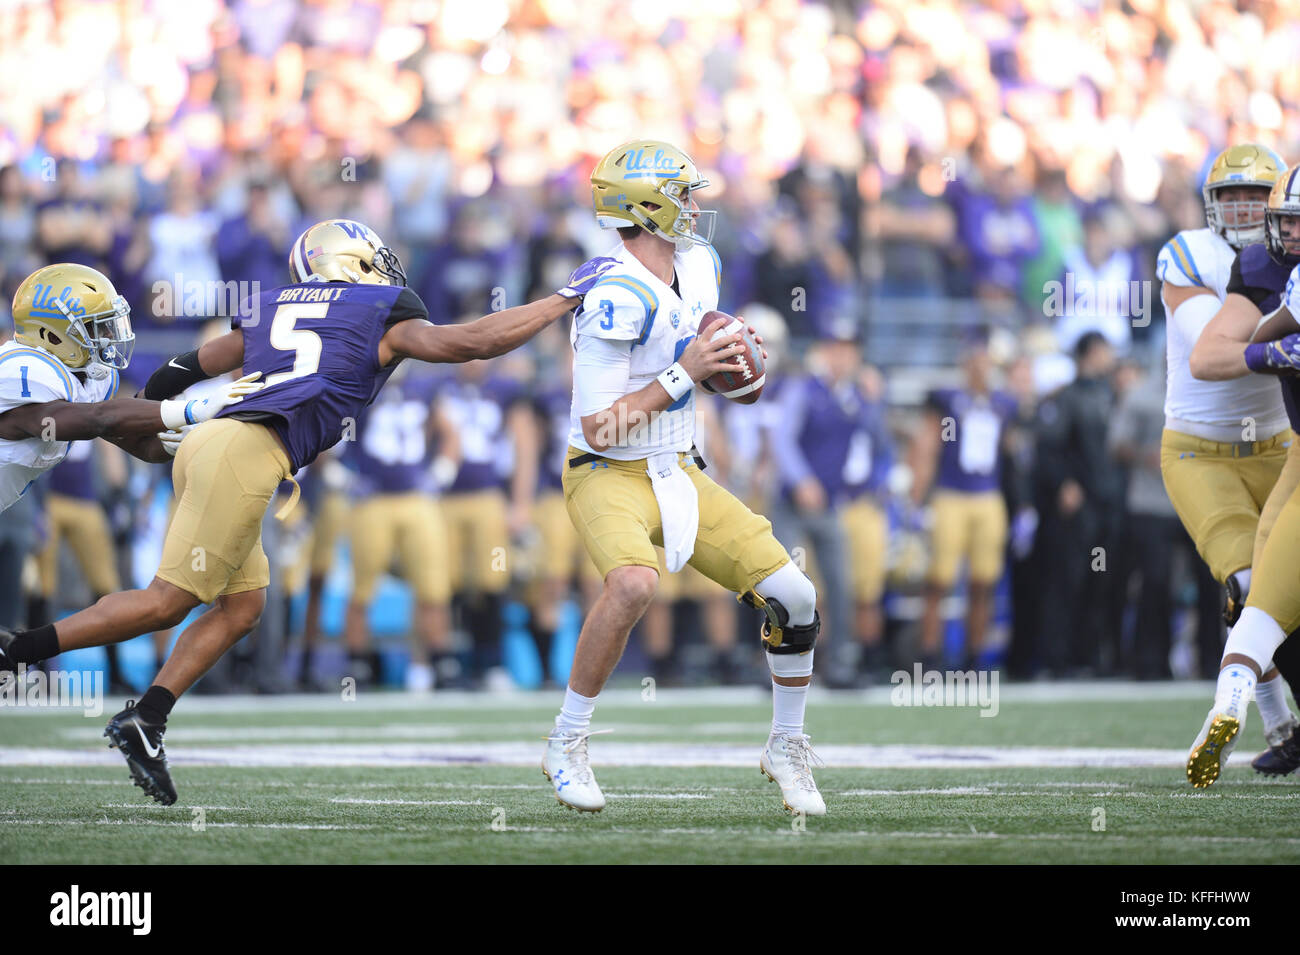 Seattle, WA, USA. 28th Oct, 2017. UCLA quarterback Josh Rosen (3) gets pressure from UW defender Myles Bryant (5) during a PAC12 football game between the UCLA Bruins and the Washington Huskies. The game was played at Husky Stadium on the University of Washington campus in Seattle, WA. Jeff Halstead/CSM/Alamy Live News Stock Photo